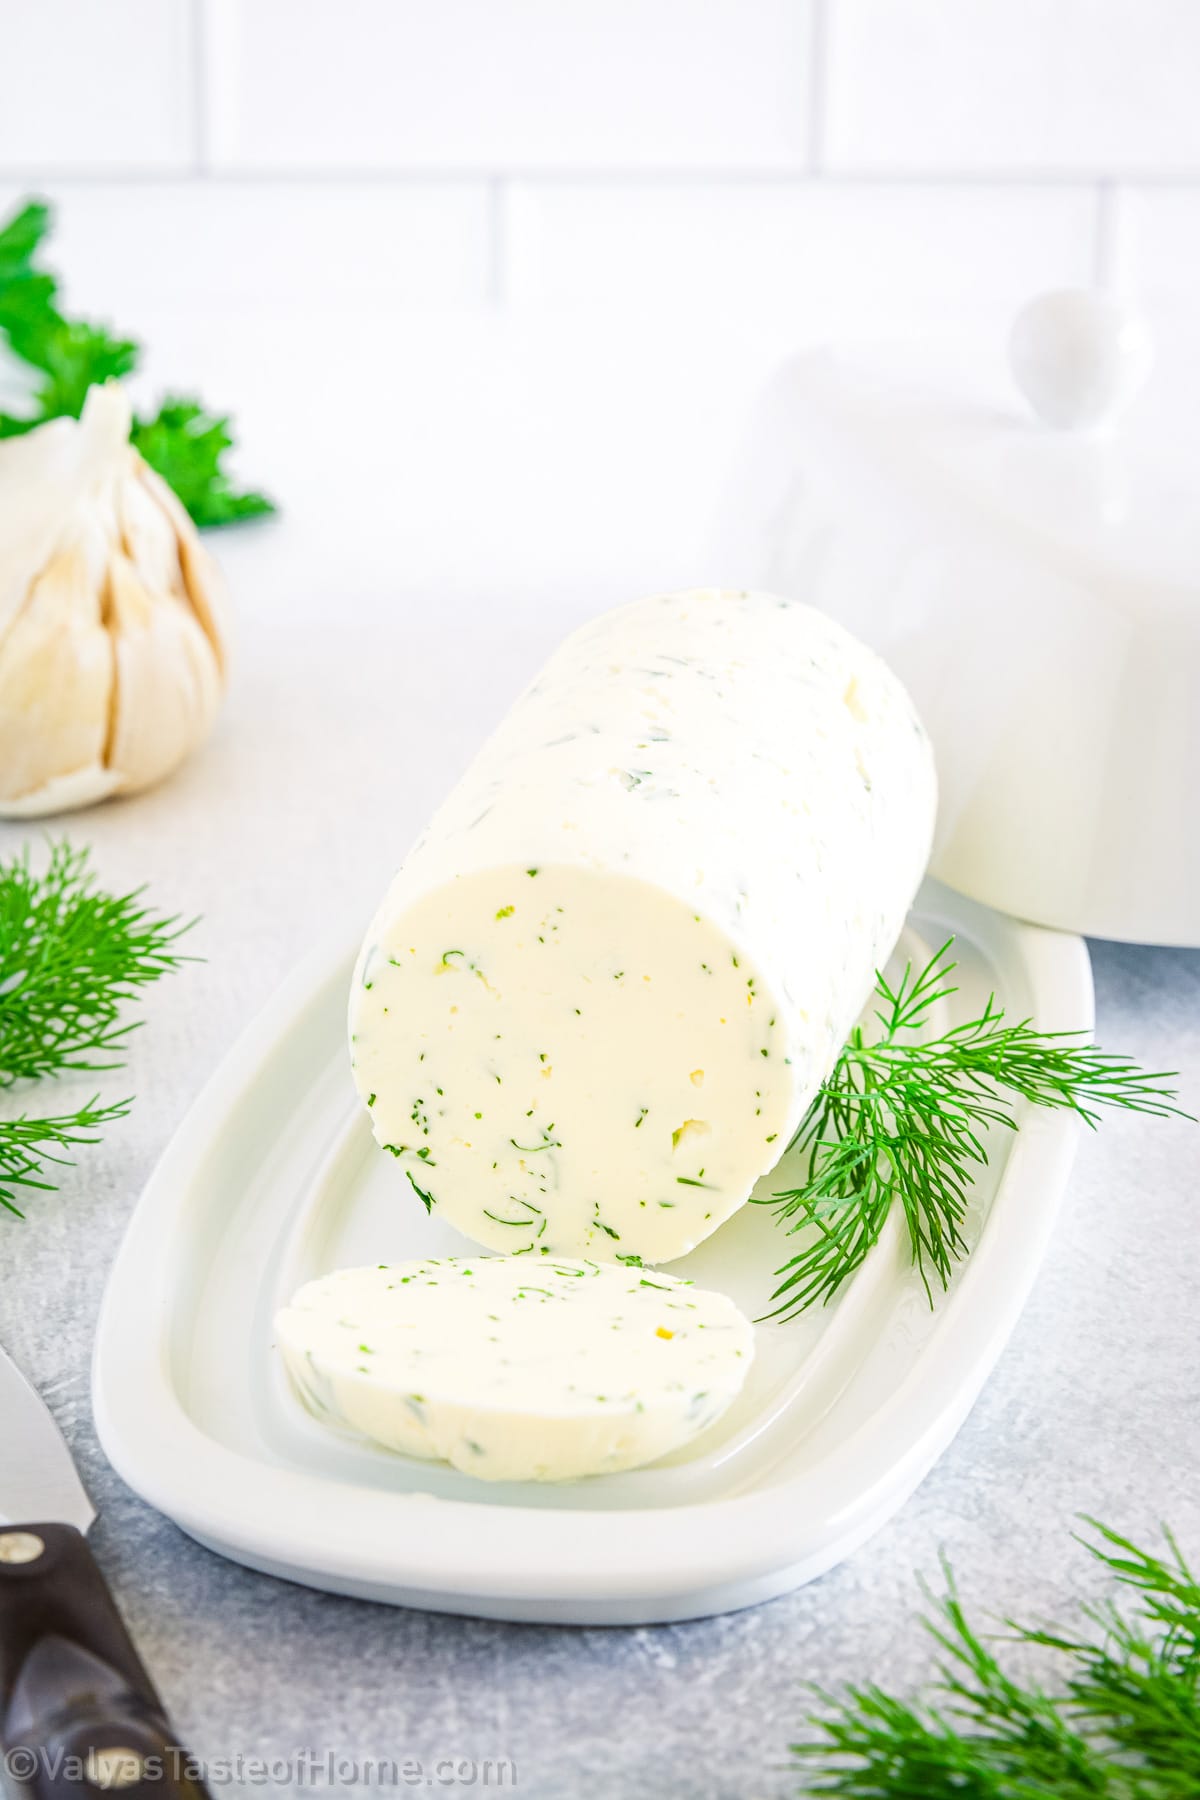 This Garlic Butter recipe will give you richly flavored butter enriched with the savory taste of fresh garlic, the aromatic touch of dill, and the vibrant notes of parsley.